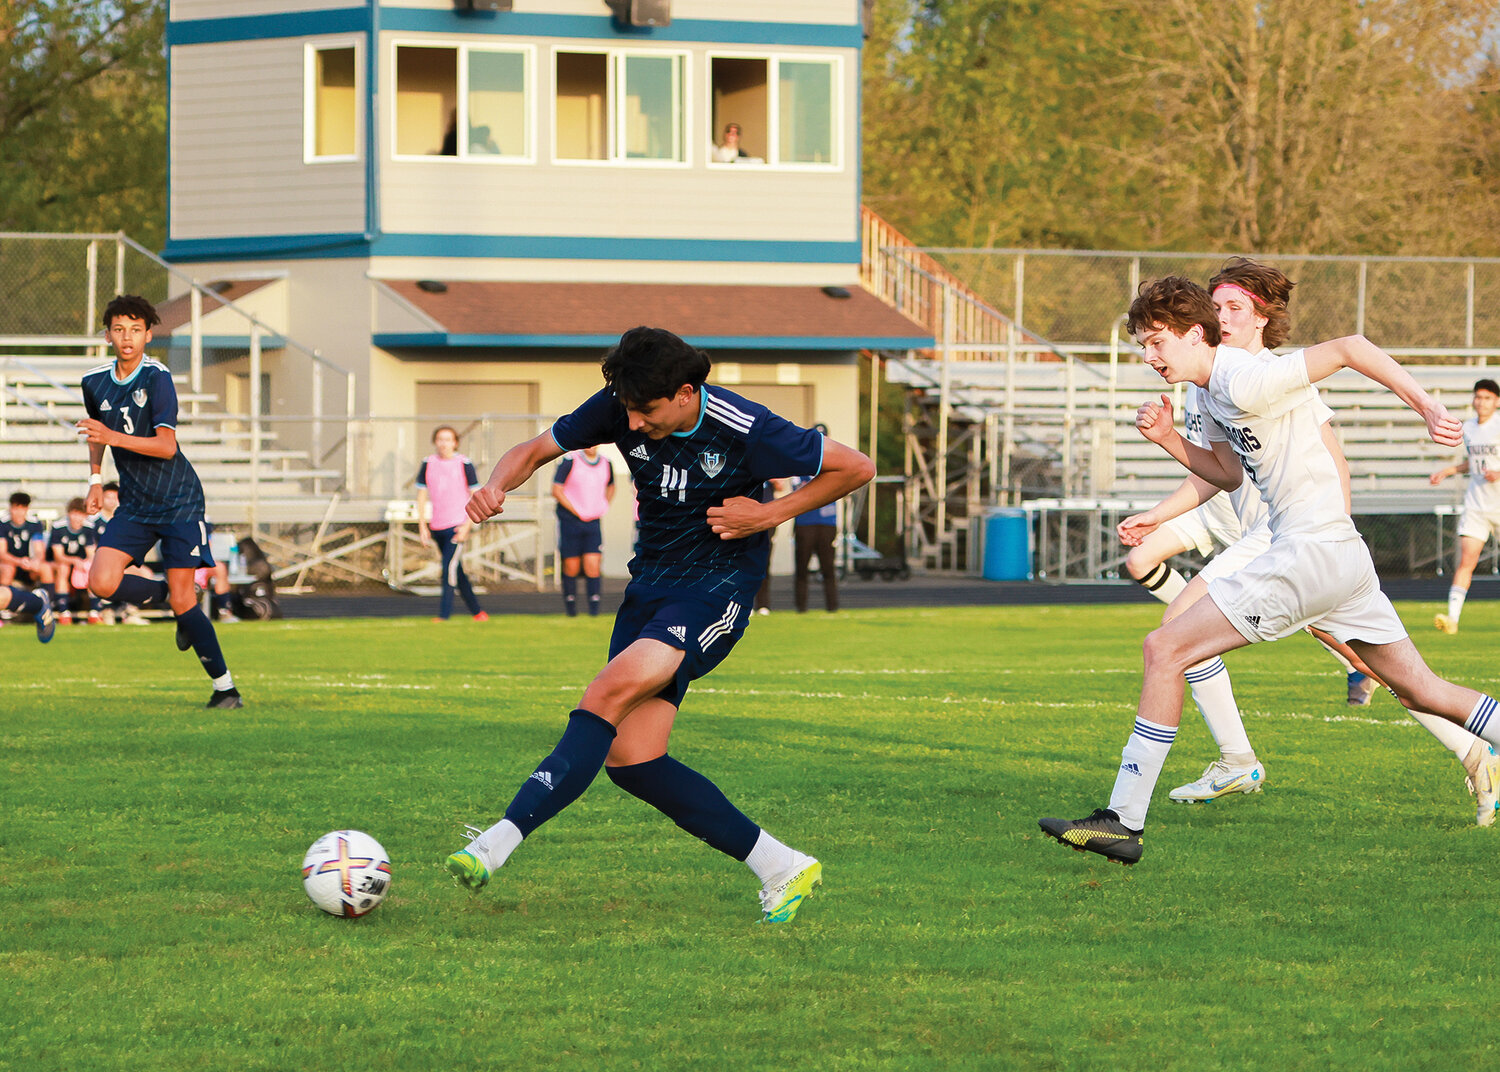 Hockinson's Alonzo Flores Barajas attempts a shot during the team's 7-0 victory over Mark Morris on Tuesday, May 2.